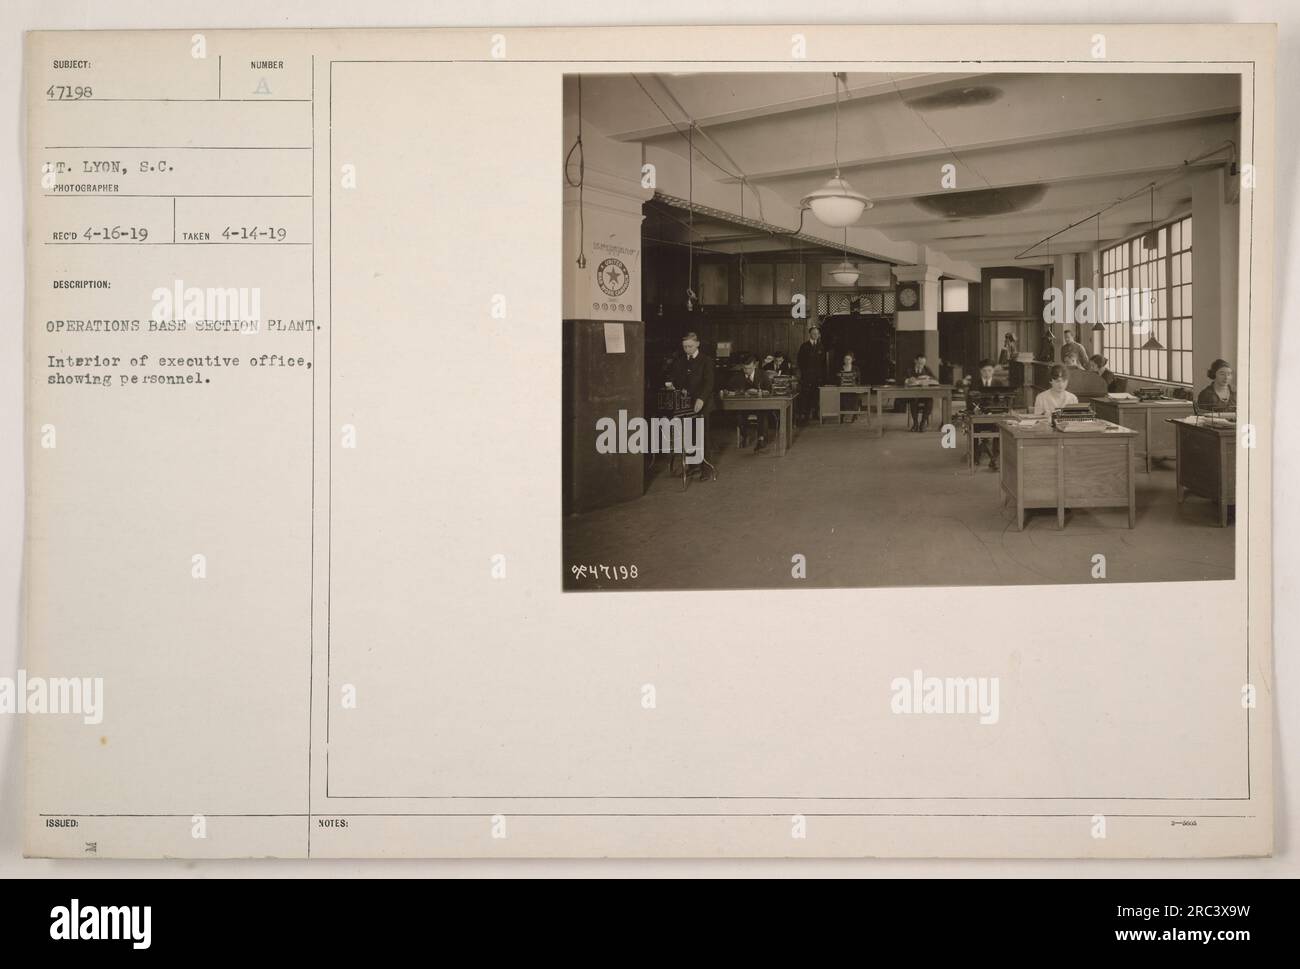 Interior of executive office at Operations Base Section Plant in New York. The photograph shows personnel working in the office. The image was taken by Lt. Lyon on April 14, 1919, and is numbered as subject 47198. Includes Bud H's notes. Stock Photo